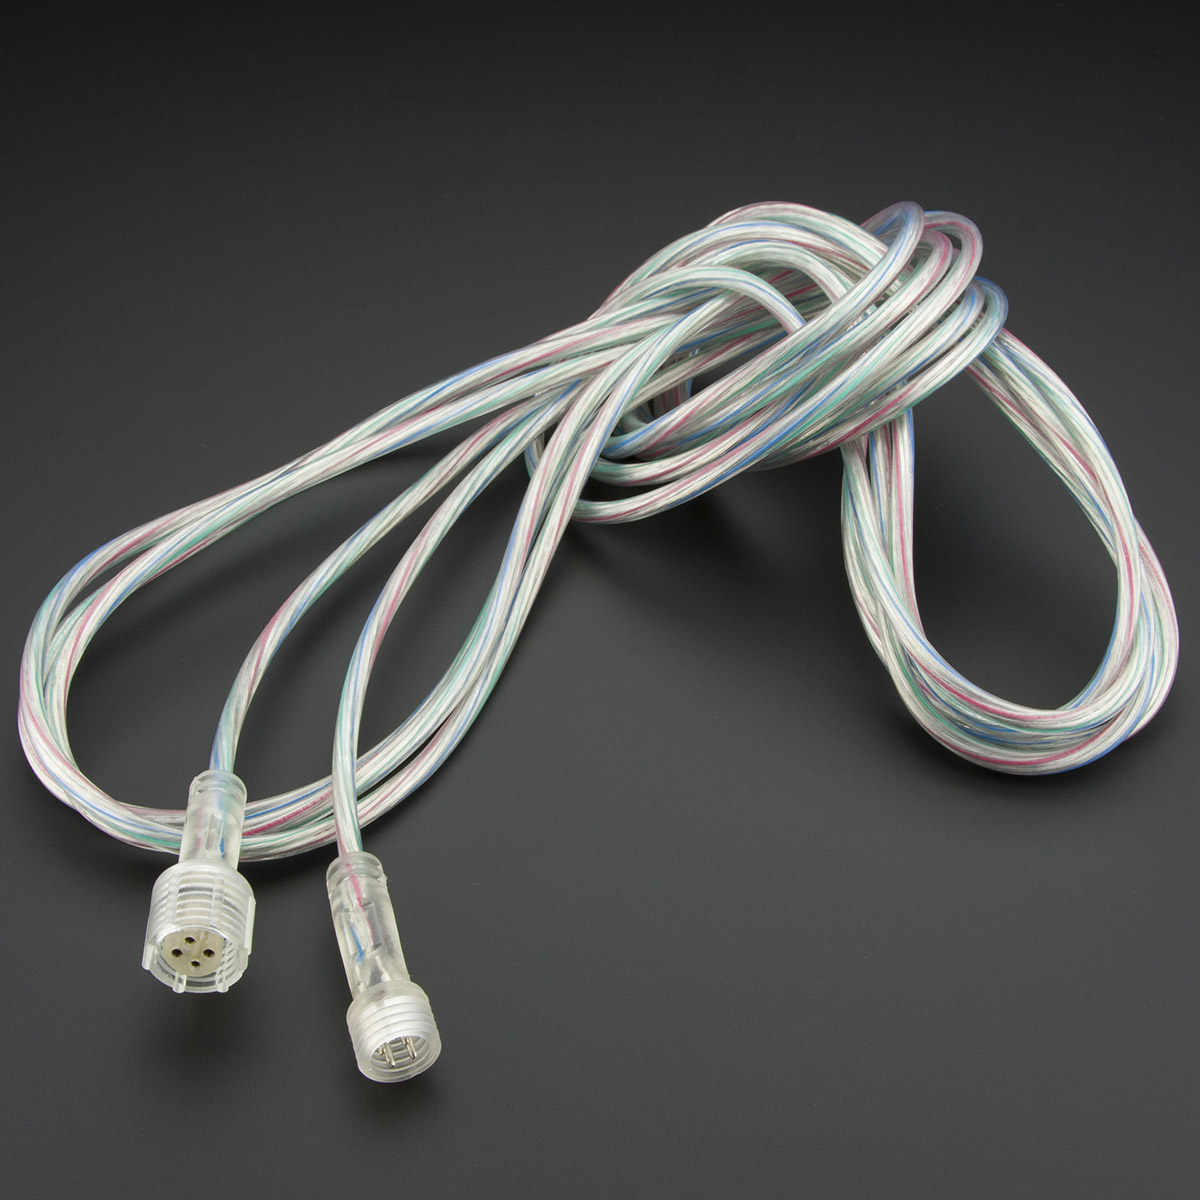 15 Foot Extension cable for waterproof RGB Strips